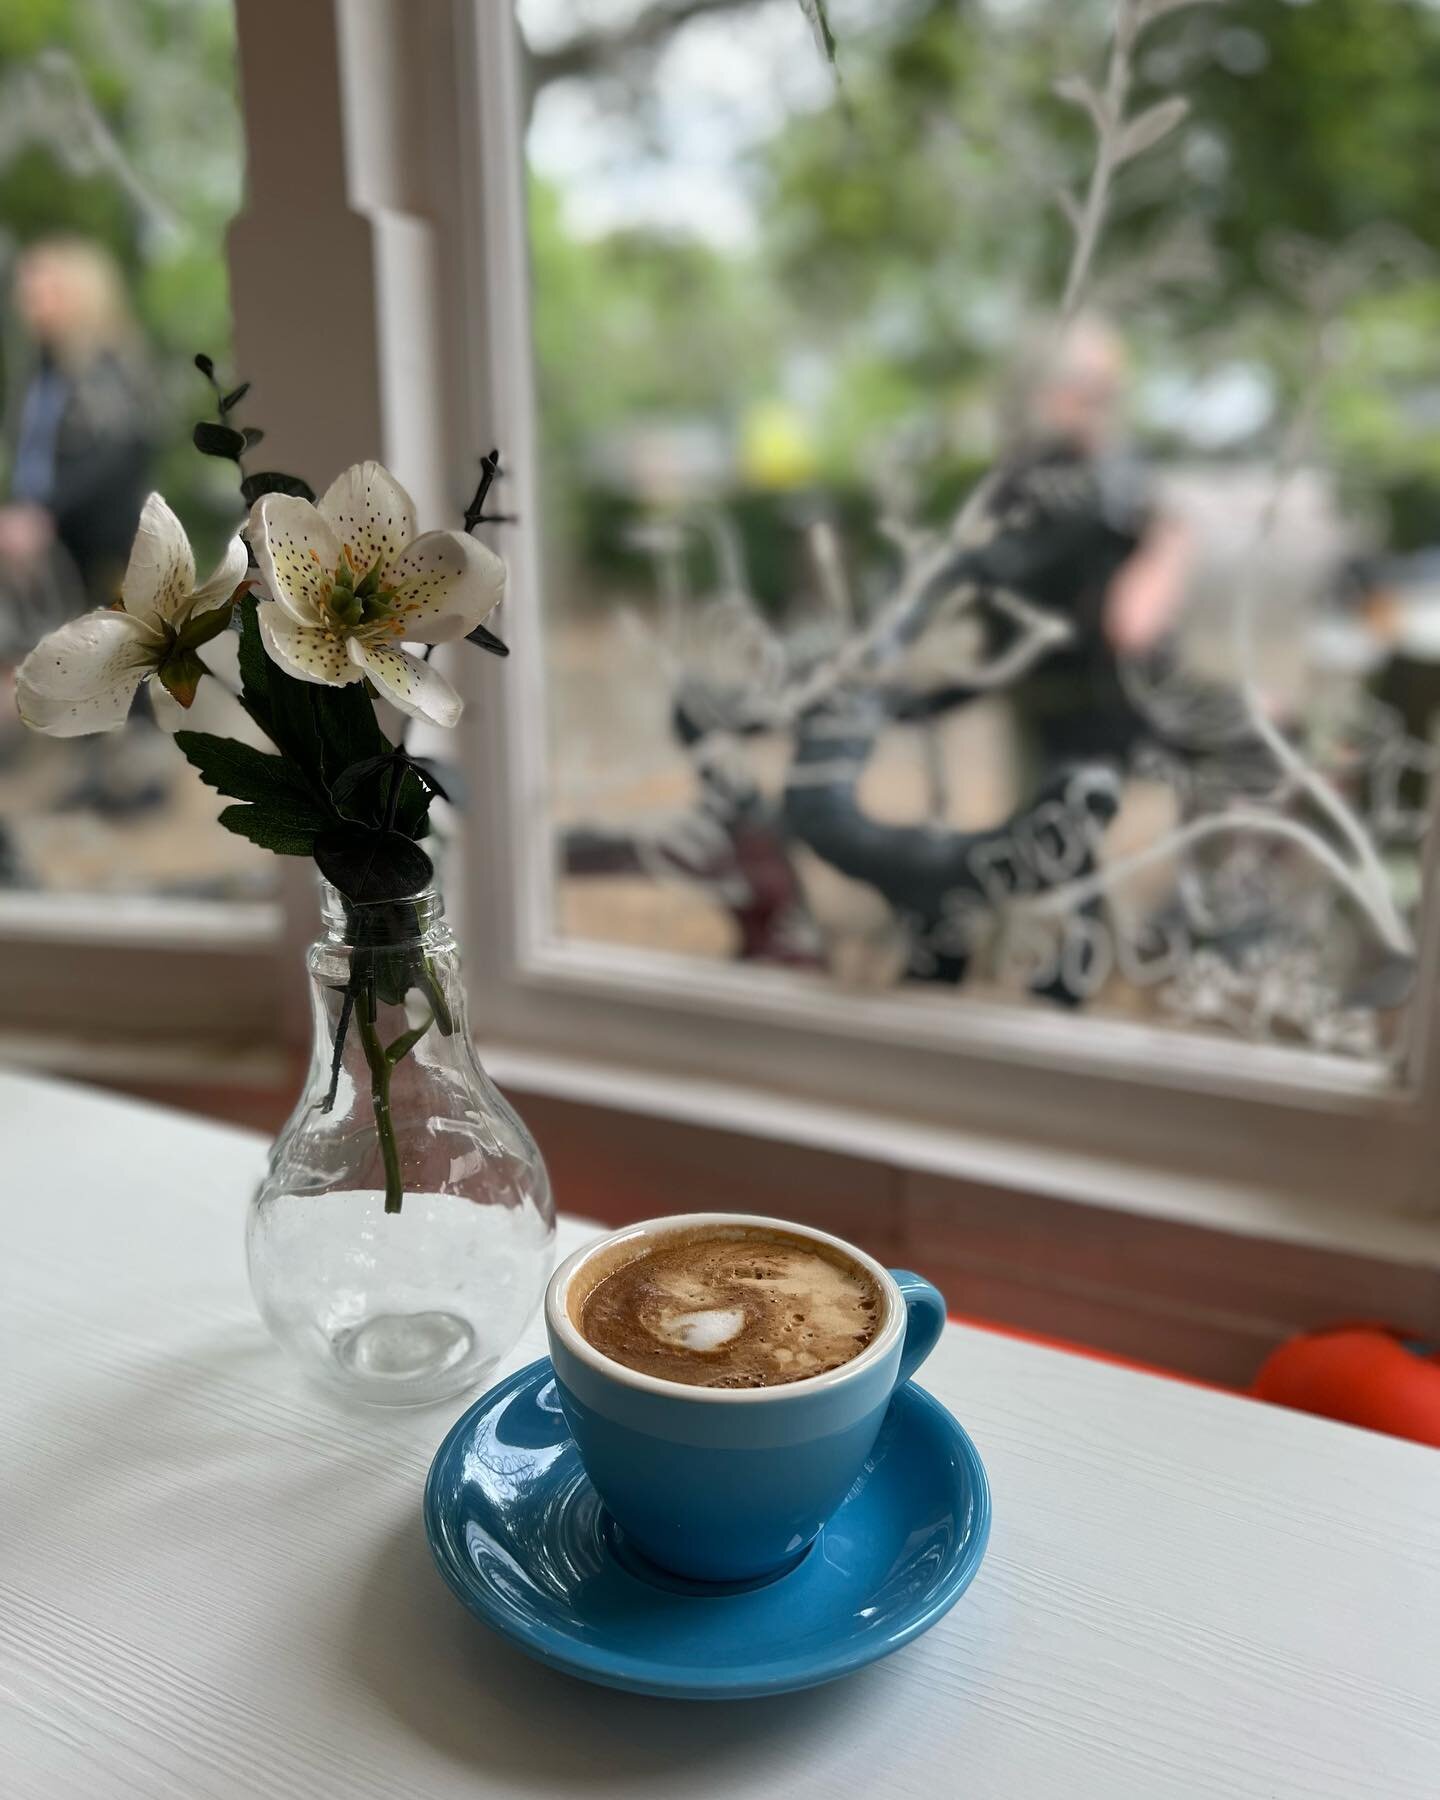 Back to school, back to routine, back to basics; a flat white and a calm moment at The Tea House watching Bishop&rsquo;s Park go by&hellip;.we&rsquo;re thinking, routine is welcome after a long, hot summer. 

Join us at The Tea House every day from 9